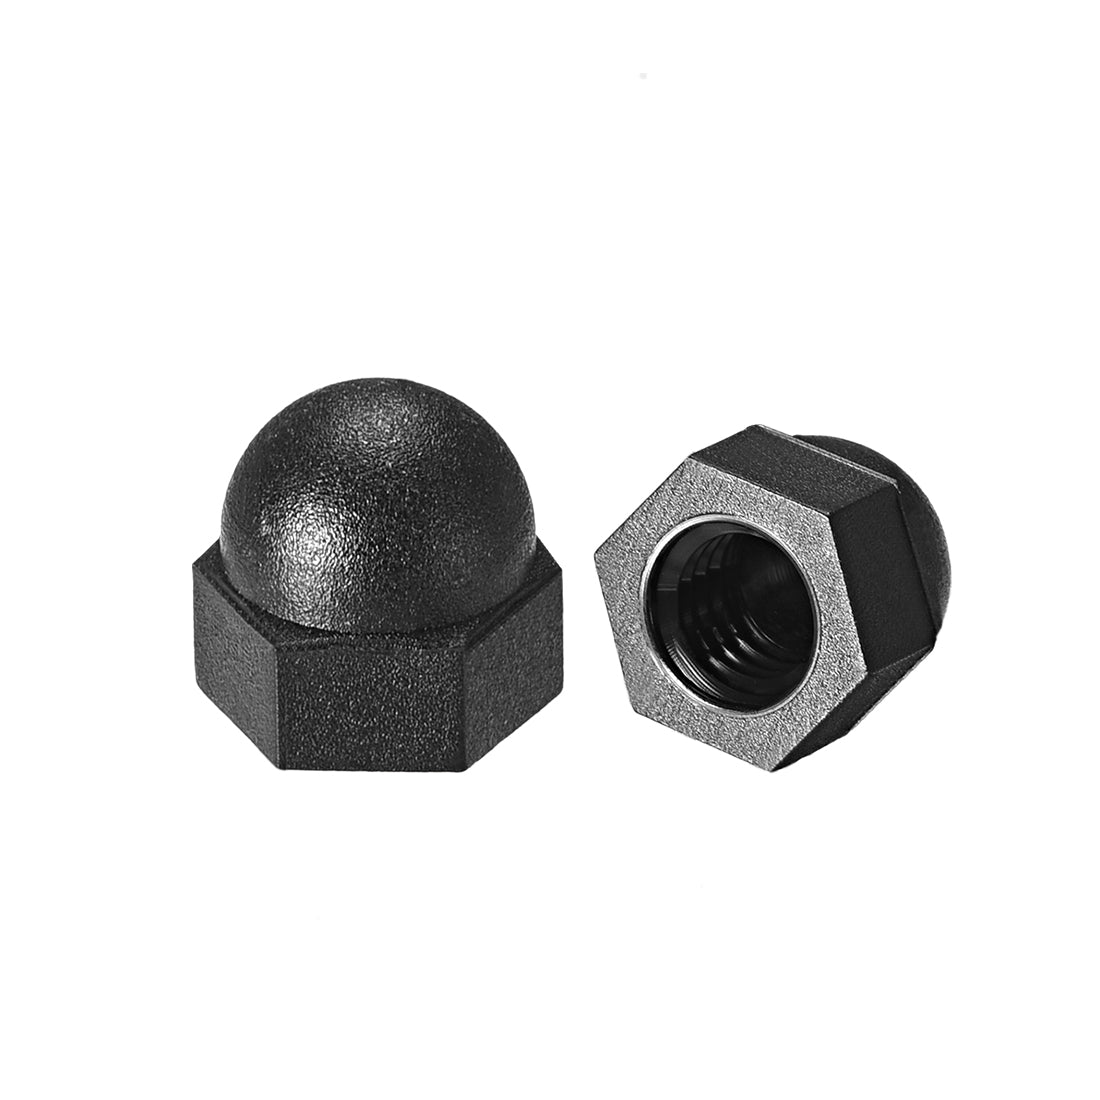 Uxcell Uxcell M5 Cap Nut, Hex Acorn Dome Head Nuts for Screws Bolts Nylon Black 50 Pcs